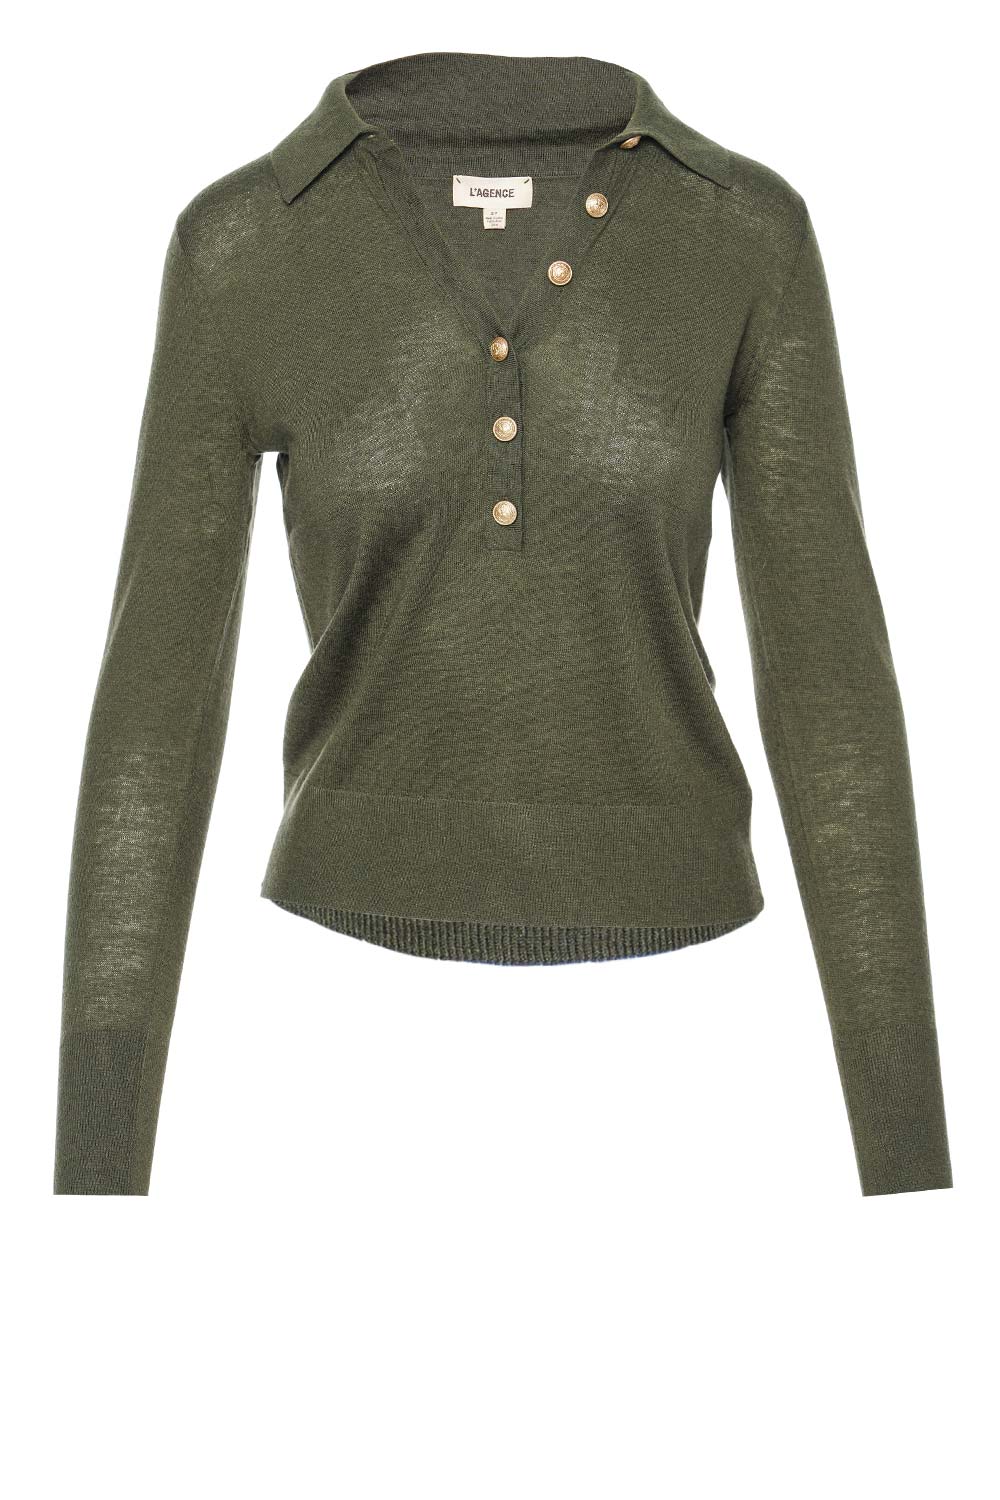 L'AGENCE Sterling Army Collared Sweater